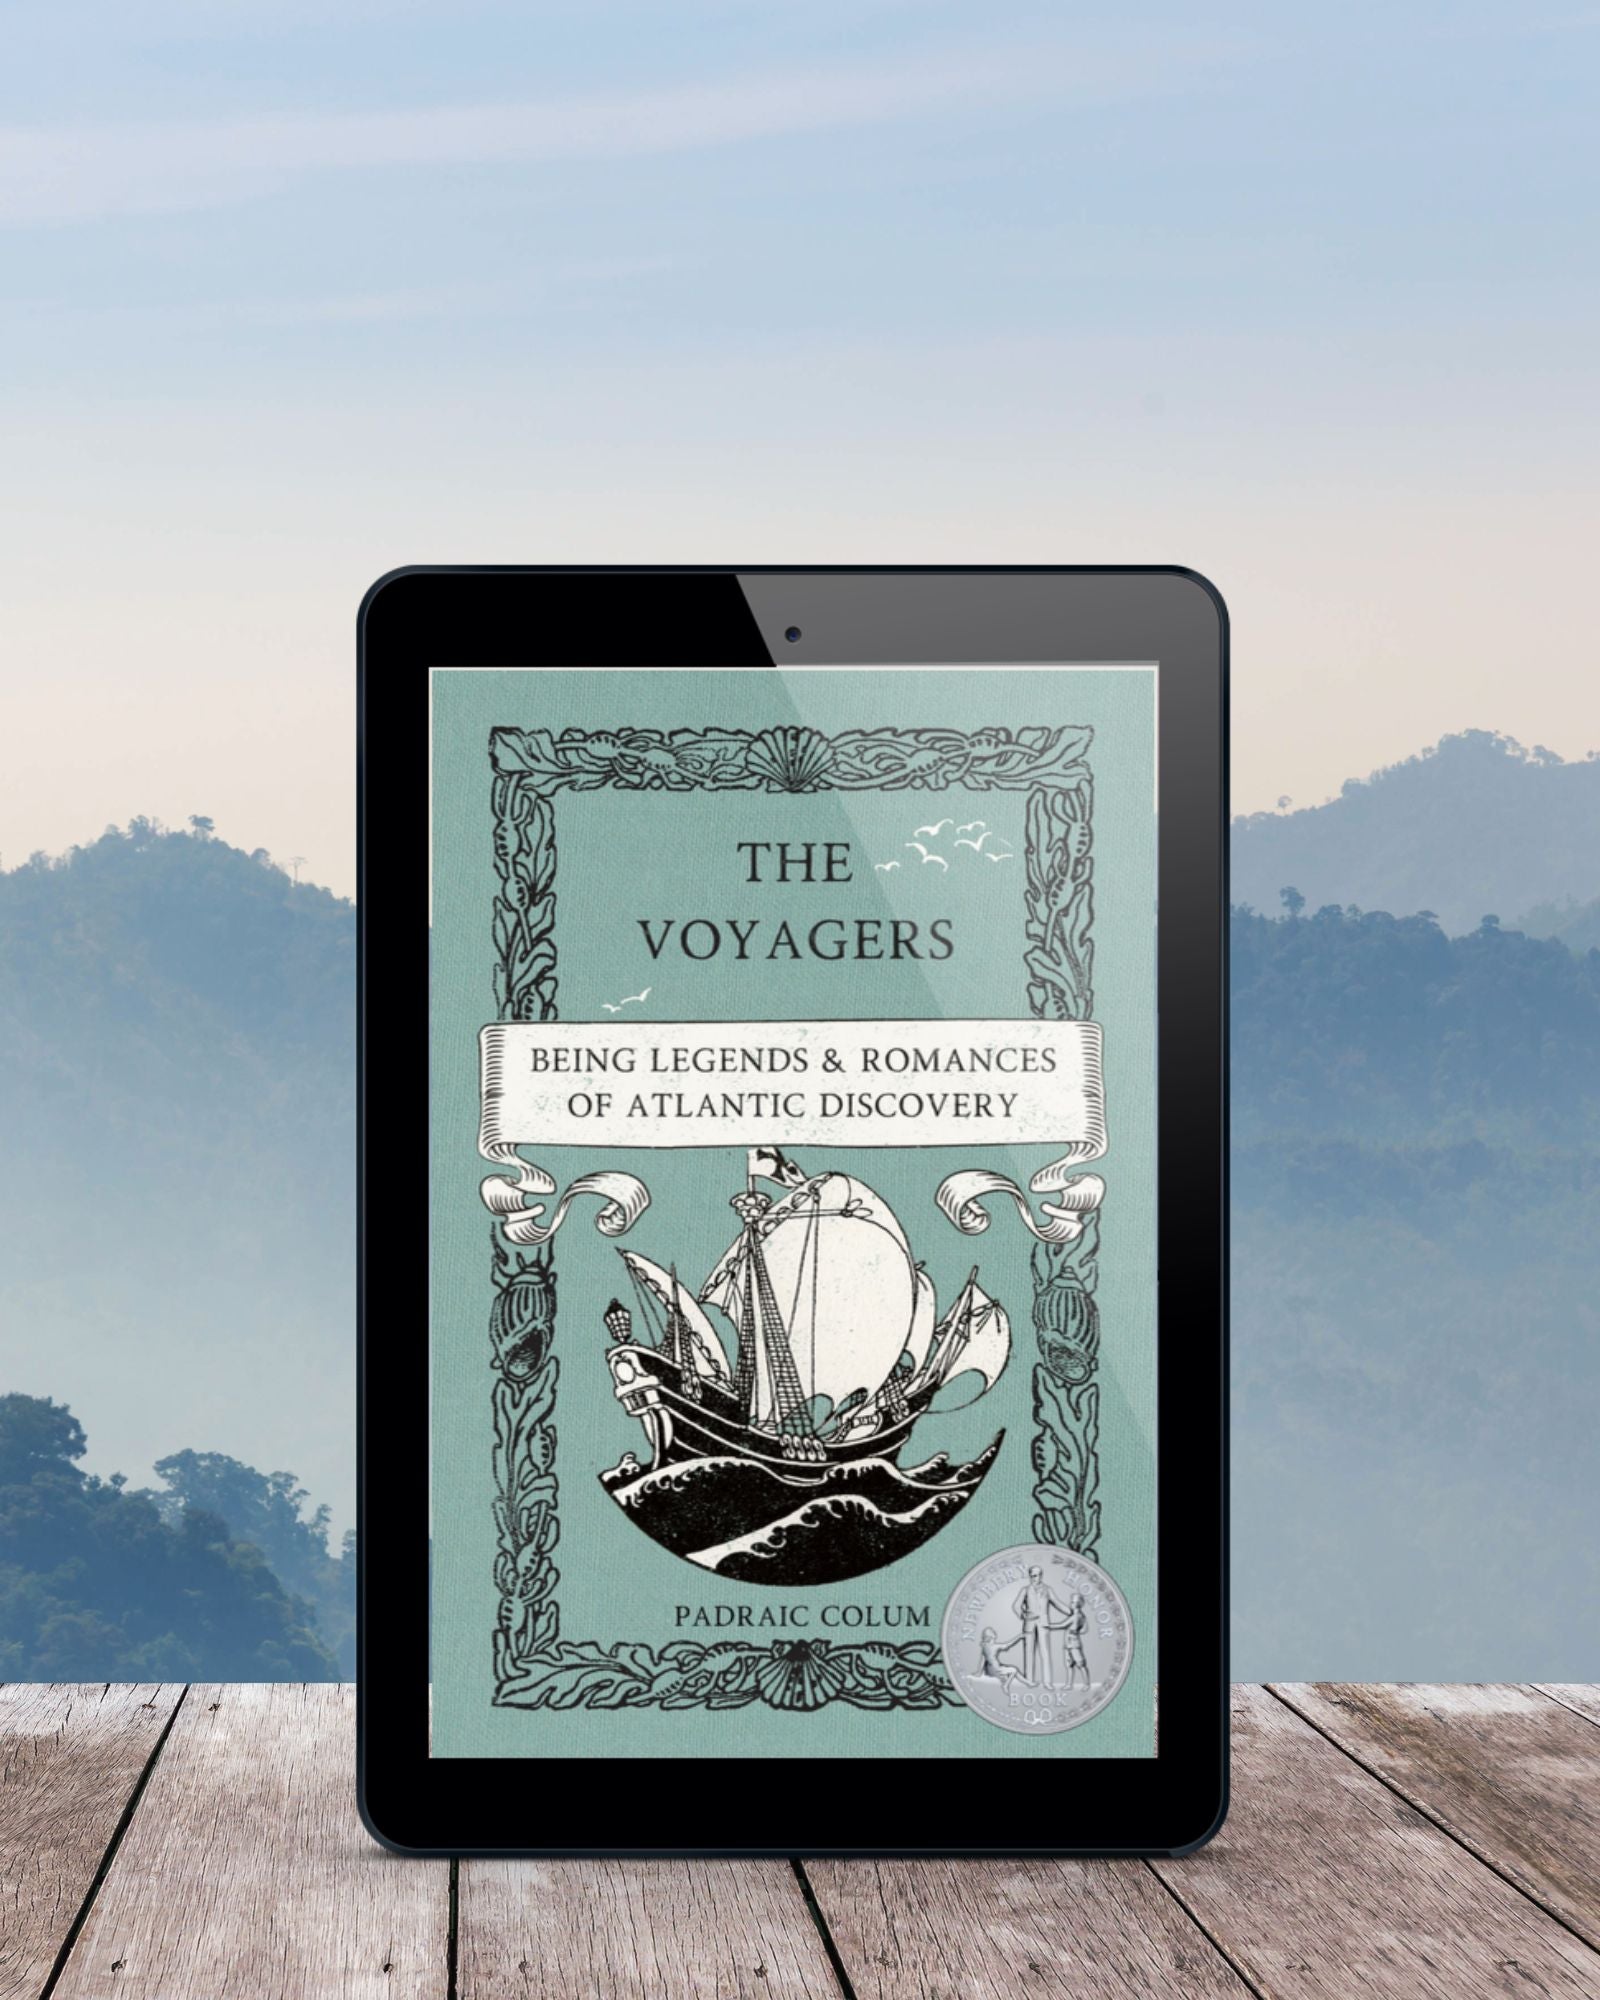 Black ereader featuring the teal cover of "The Voyagers: Being Legends & Romances of Atlantic Discovery" on grey wooden planks,  in front of a mountains cape.